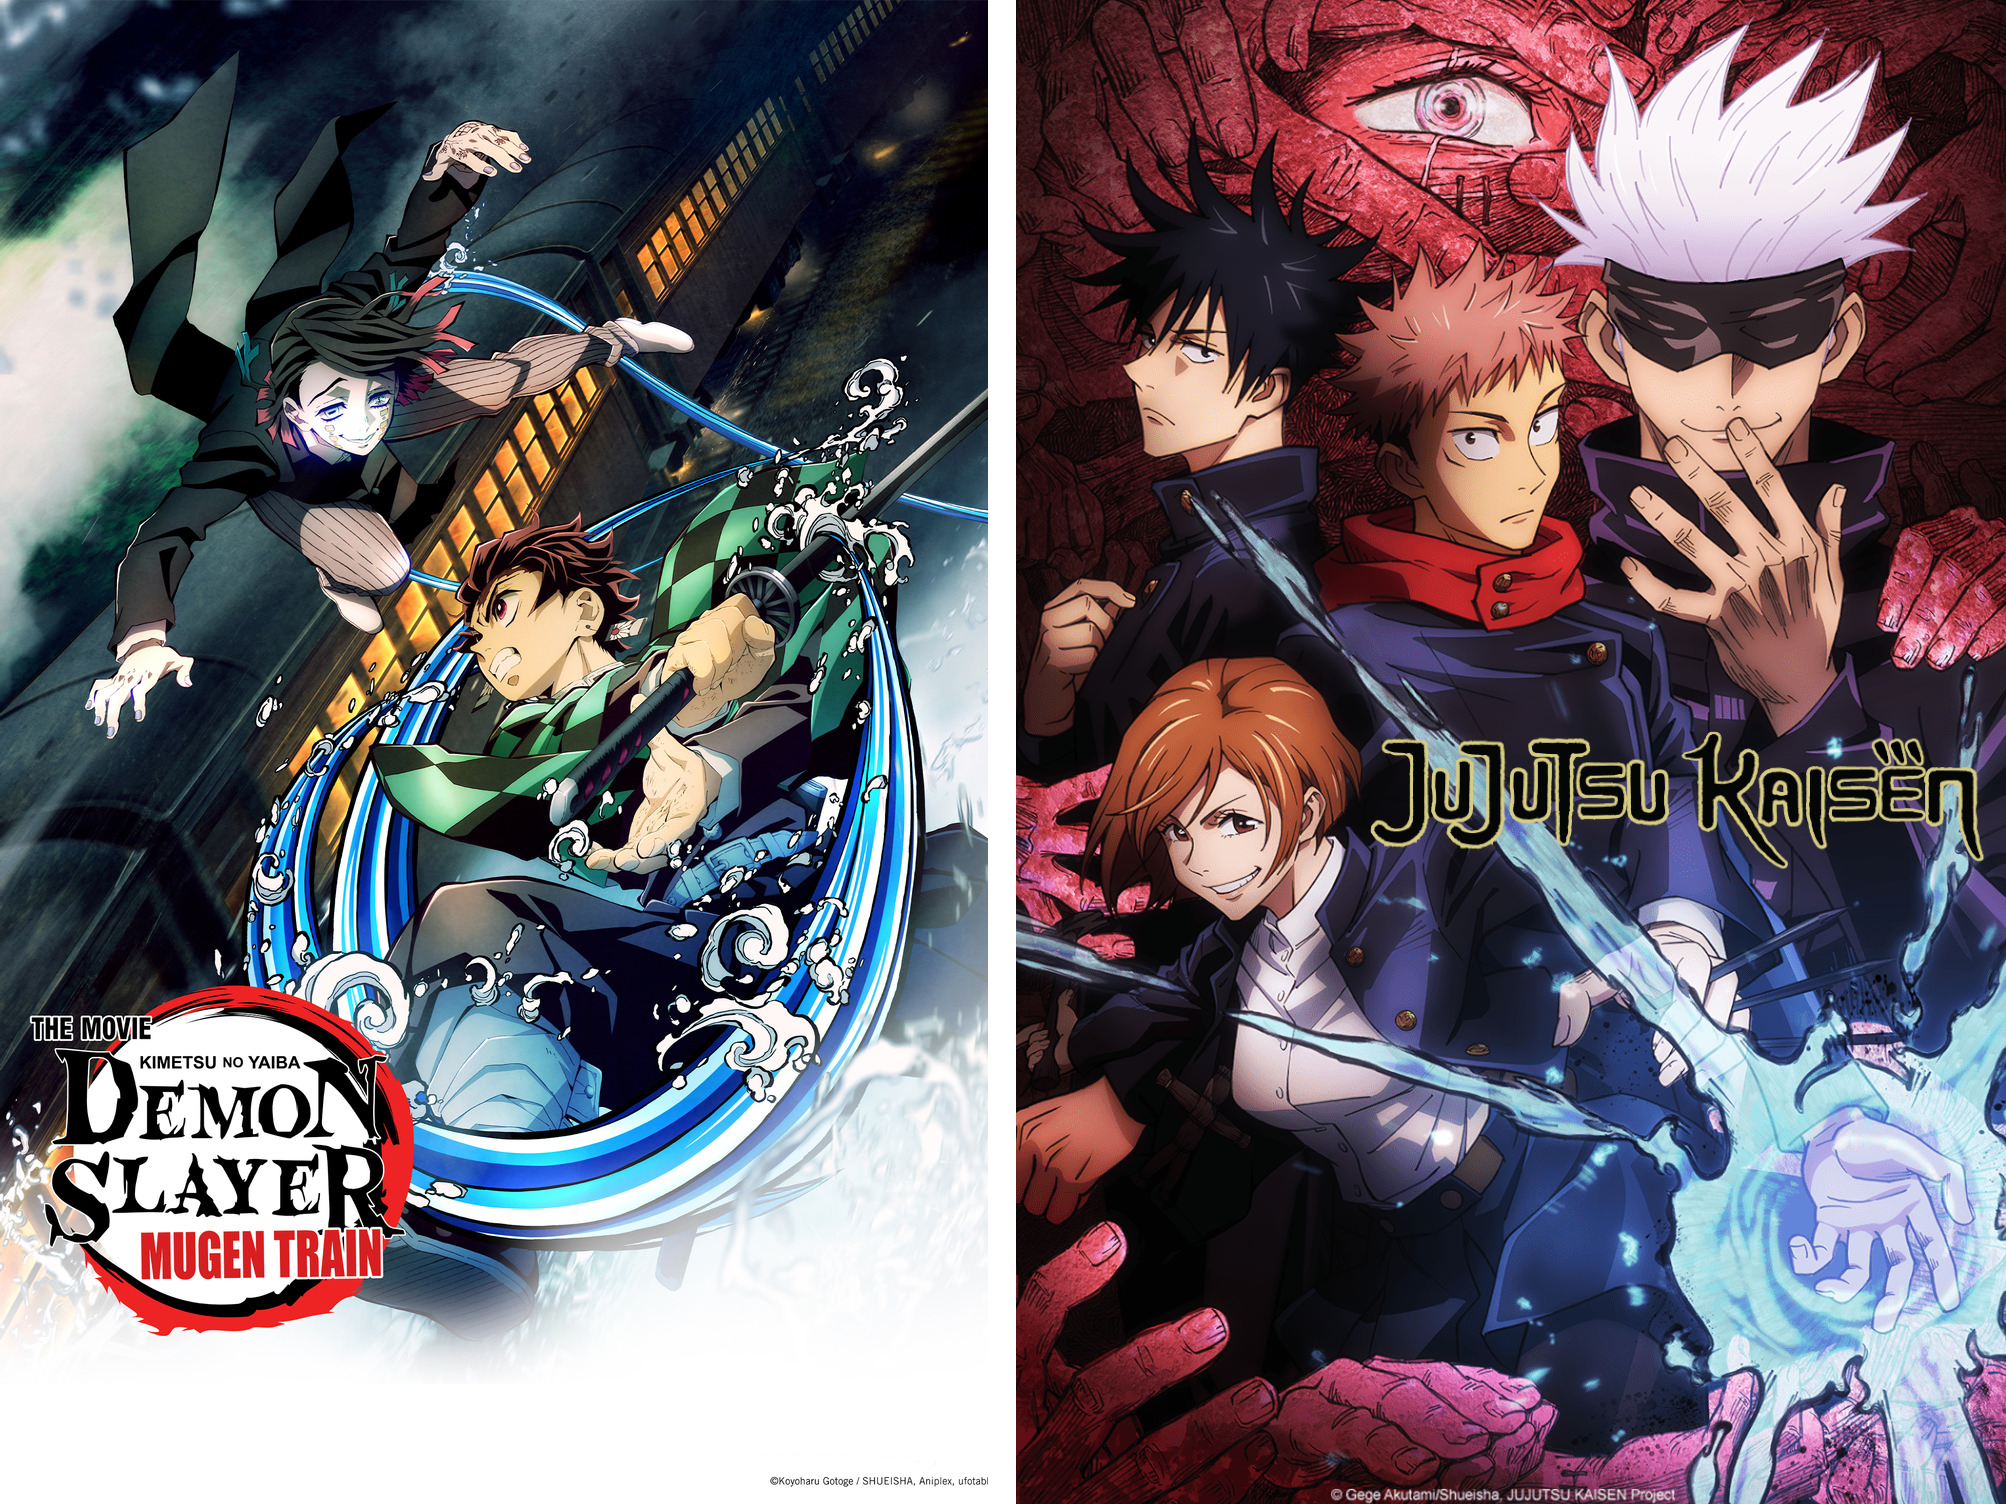 Anime Fall Season Update: Demon Slayer, Jujutsu Kaisen and More Titles  Announced  AFA: Animation For Adults : Animation News, Reviews, Articles,  Podcasts and More